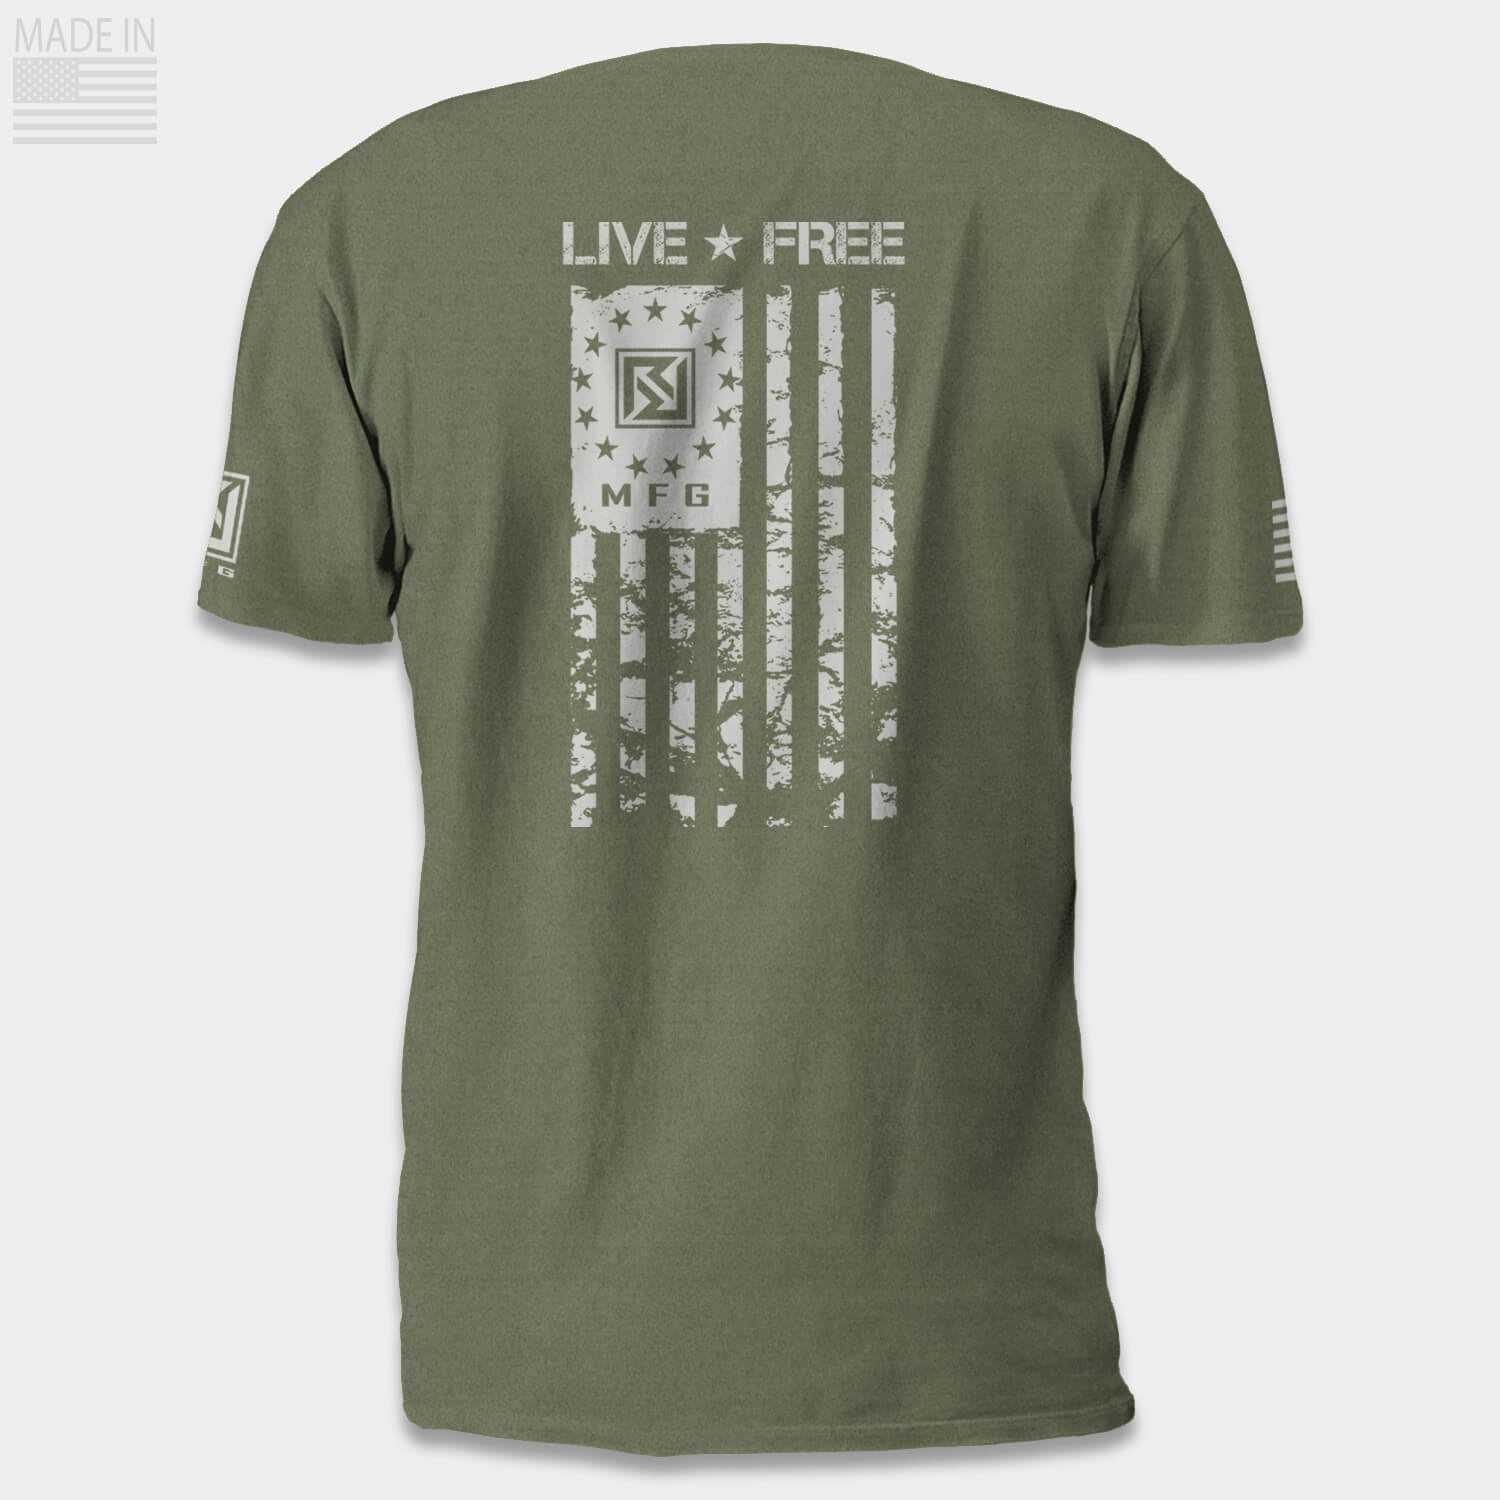 Heather Green Made in America T-Shirt with Betsy Ross Flag